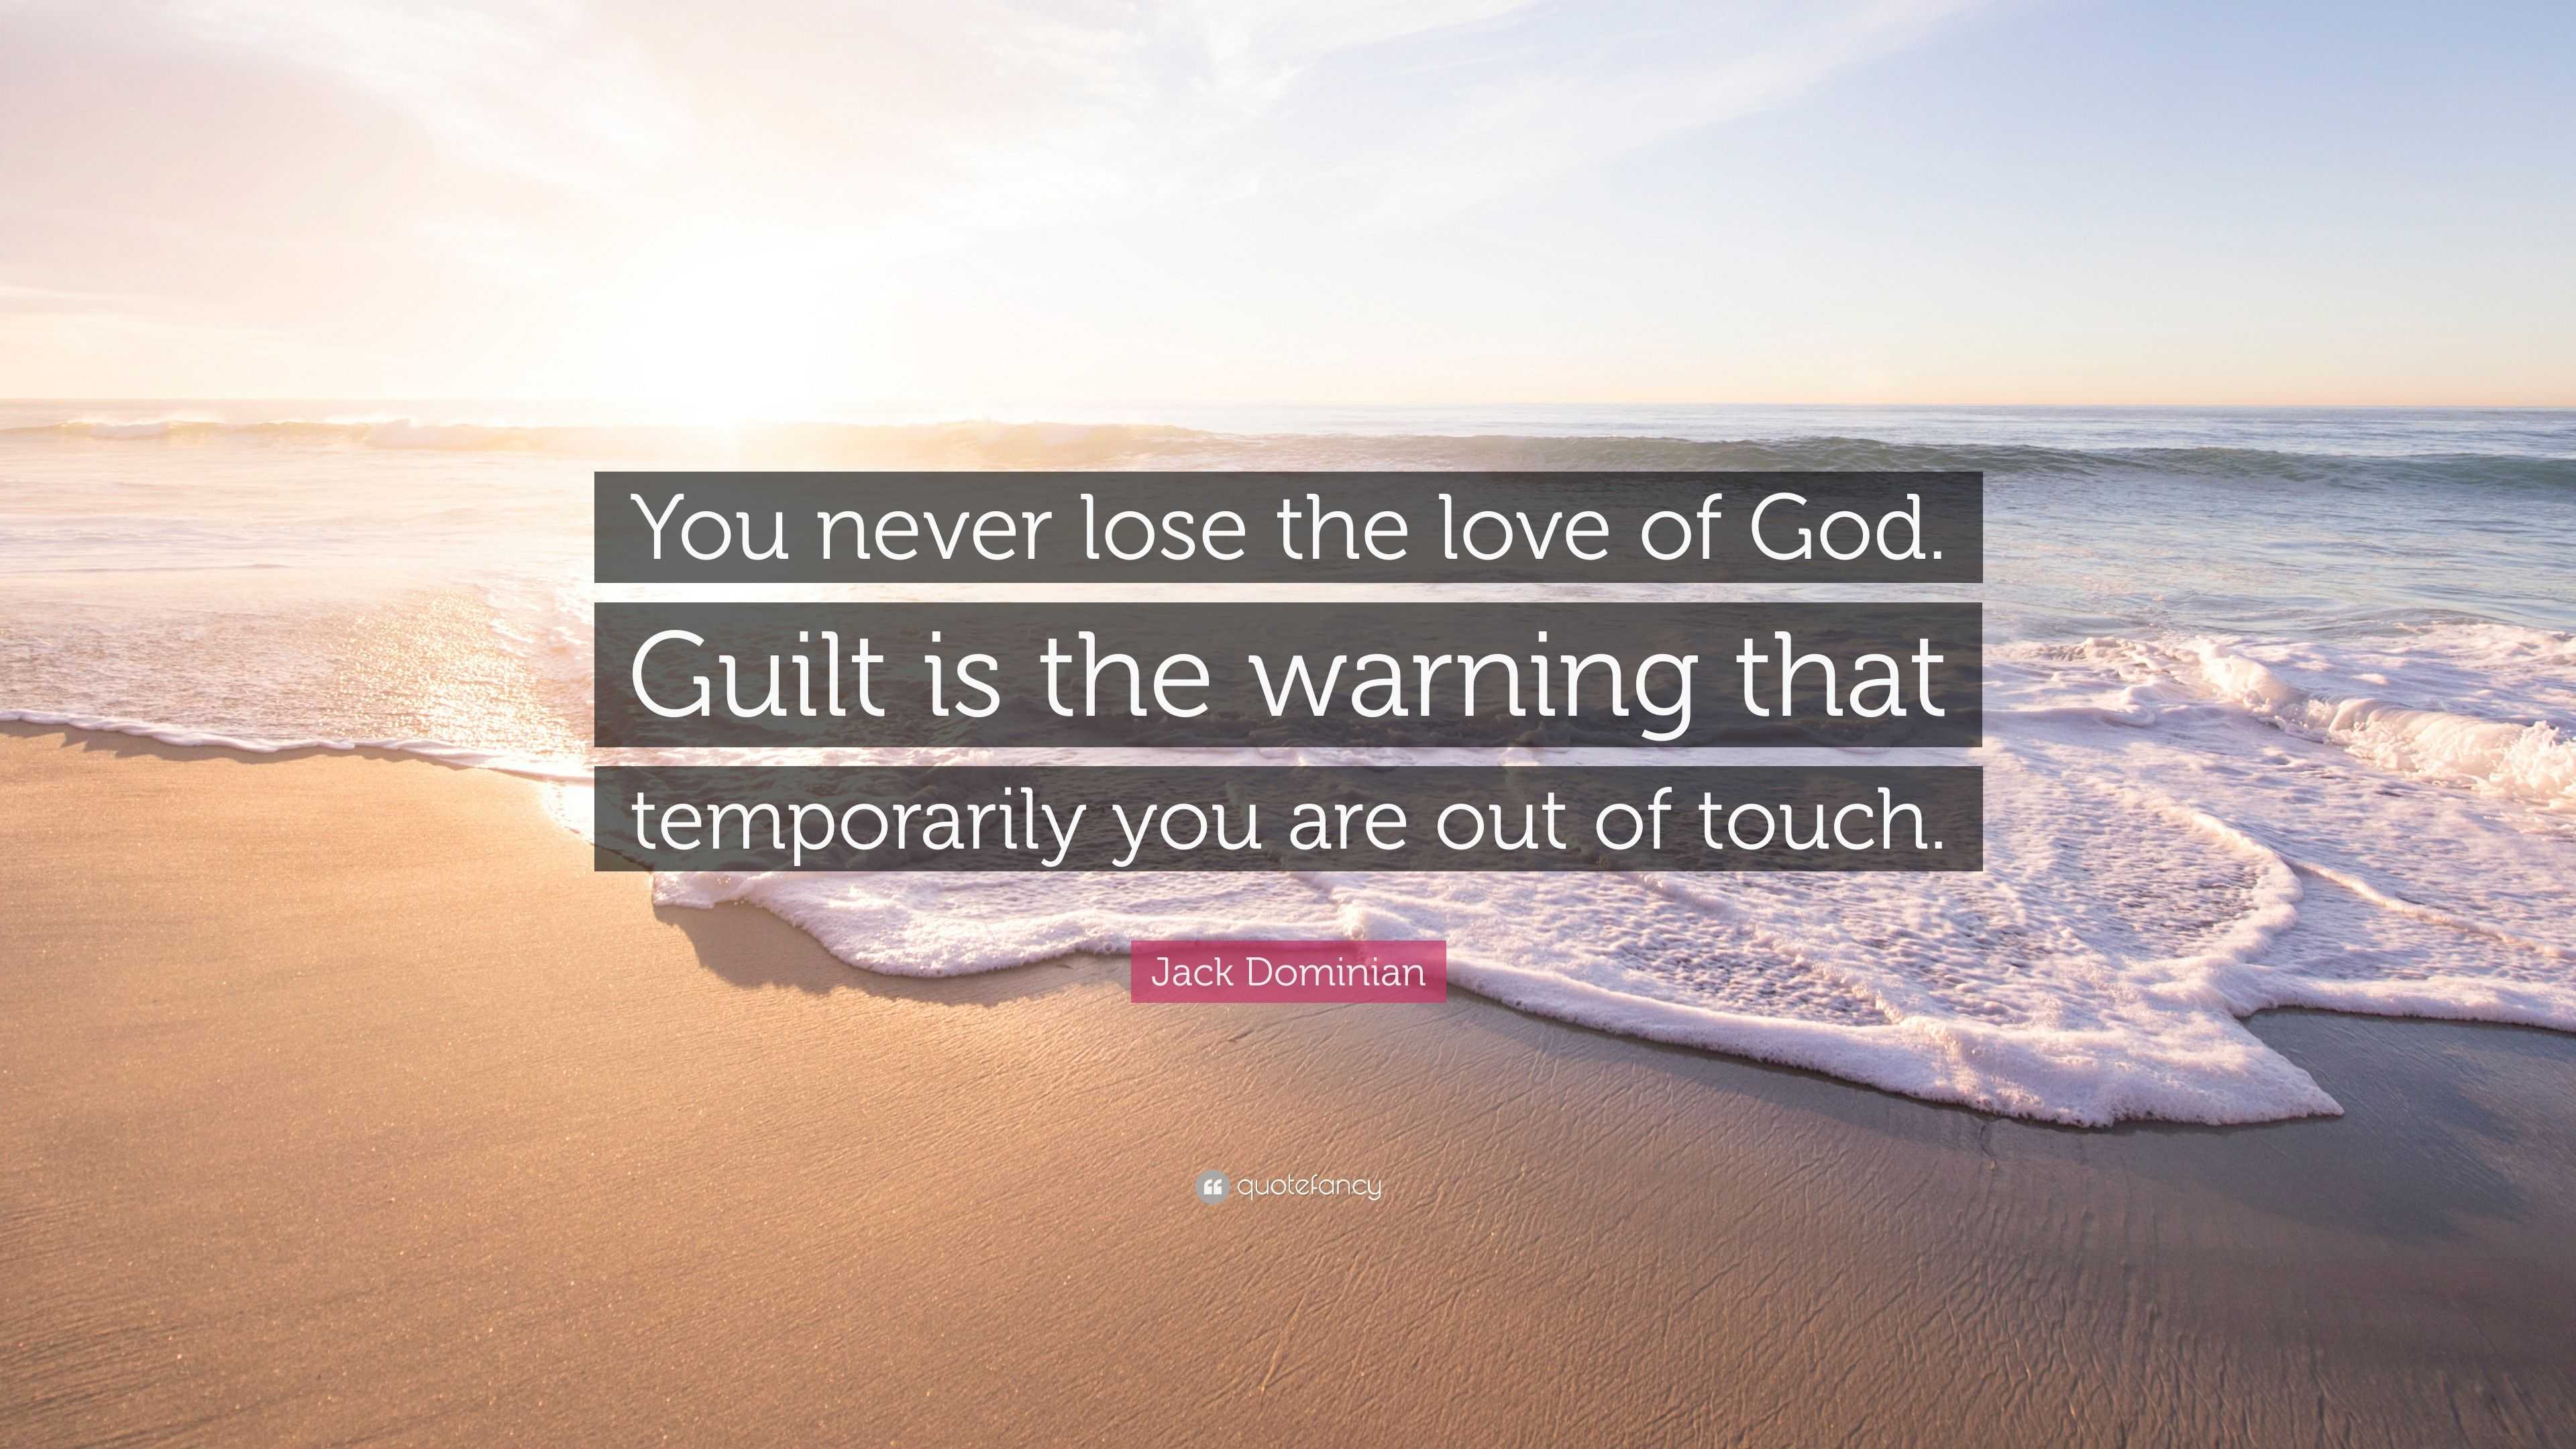 Jack Dominian Quote “You never lose the love of God Guilt is the